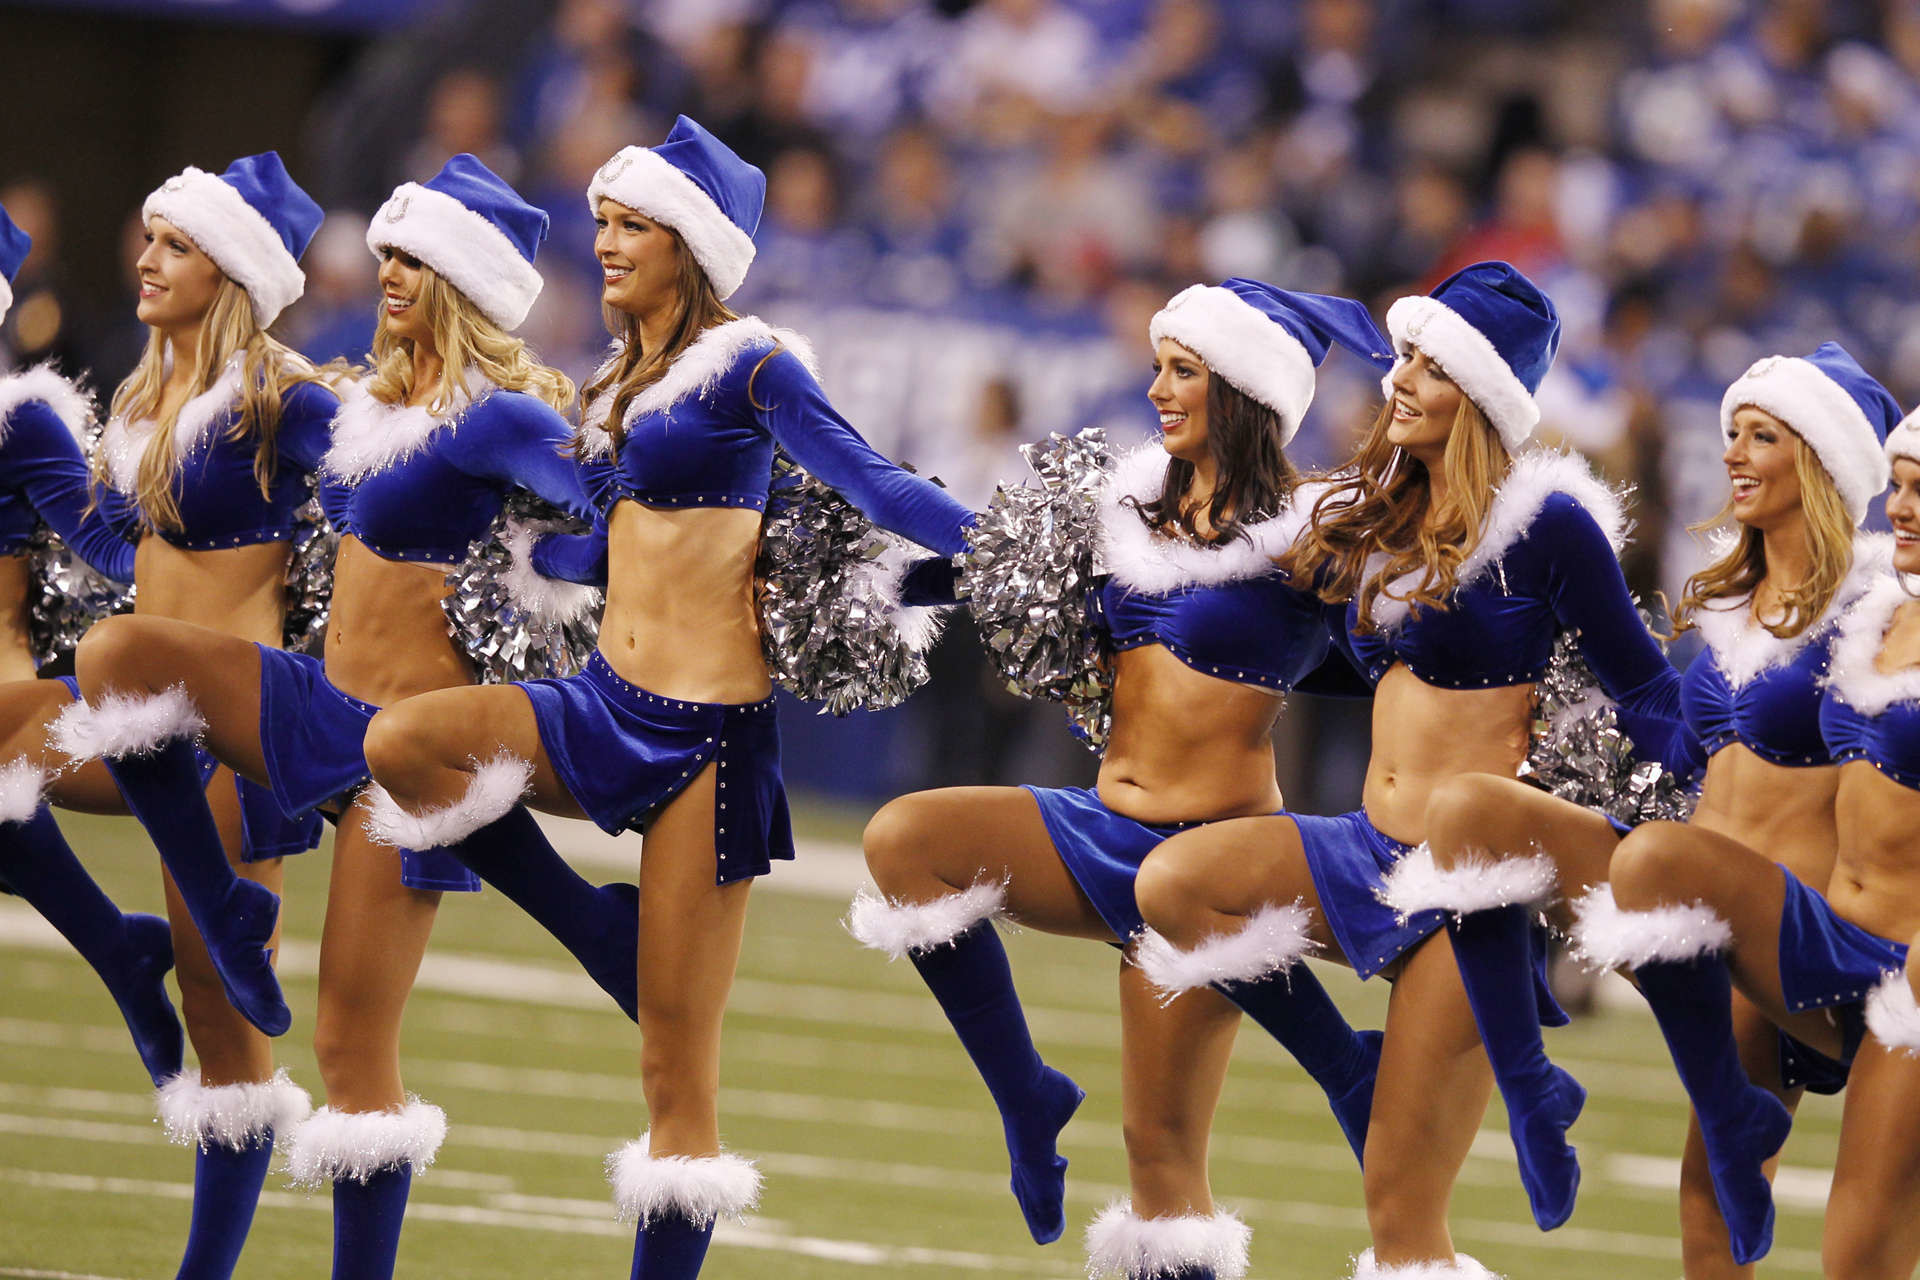 1920x1280 Indianapolis, Colts, Cheerleaders, Widescreen, High, Definition, Full,  Free, Desktop, Background, Pictures, Widescreen, Desktop Images, Colourful,  ...